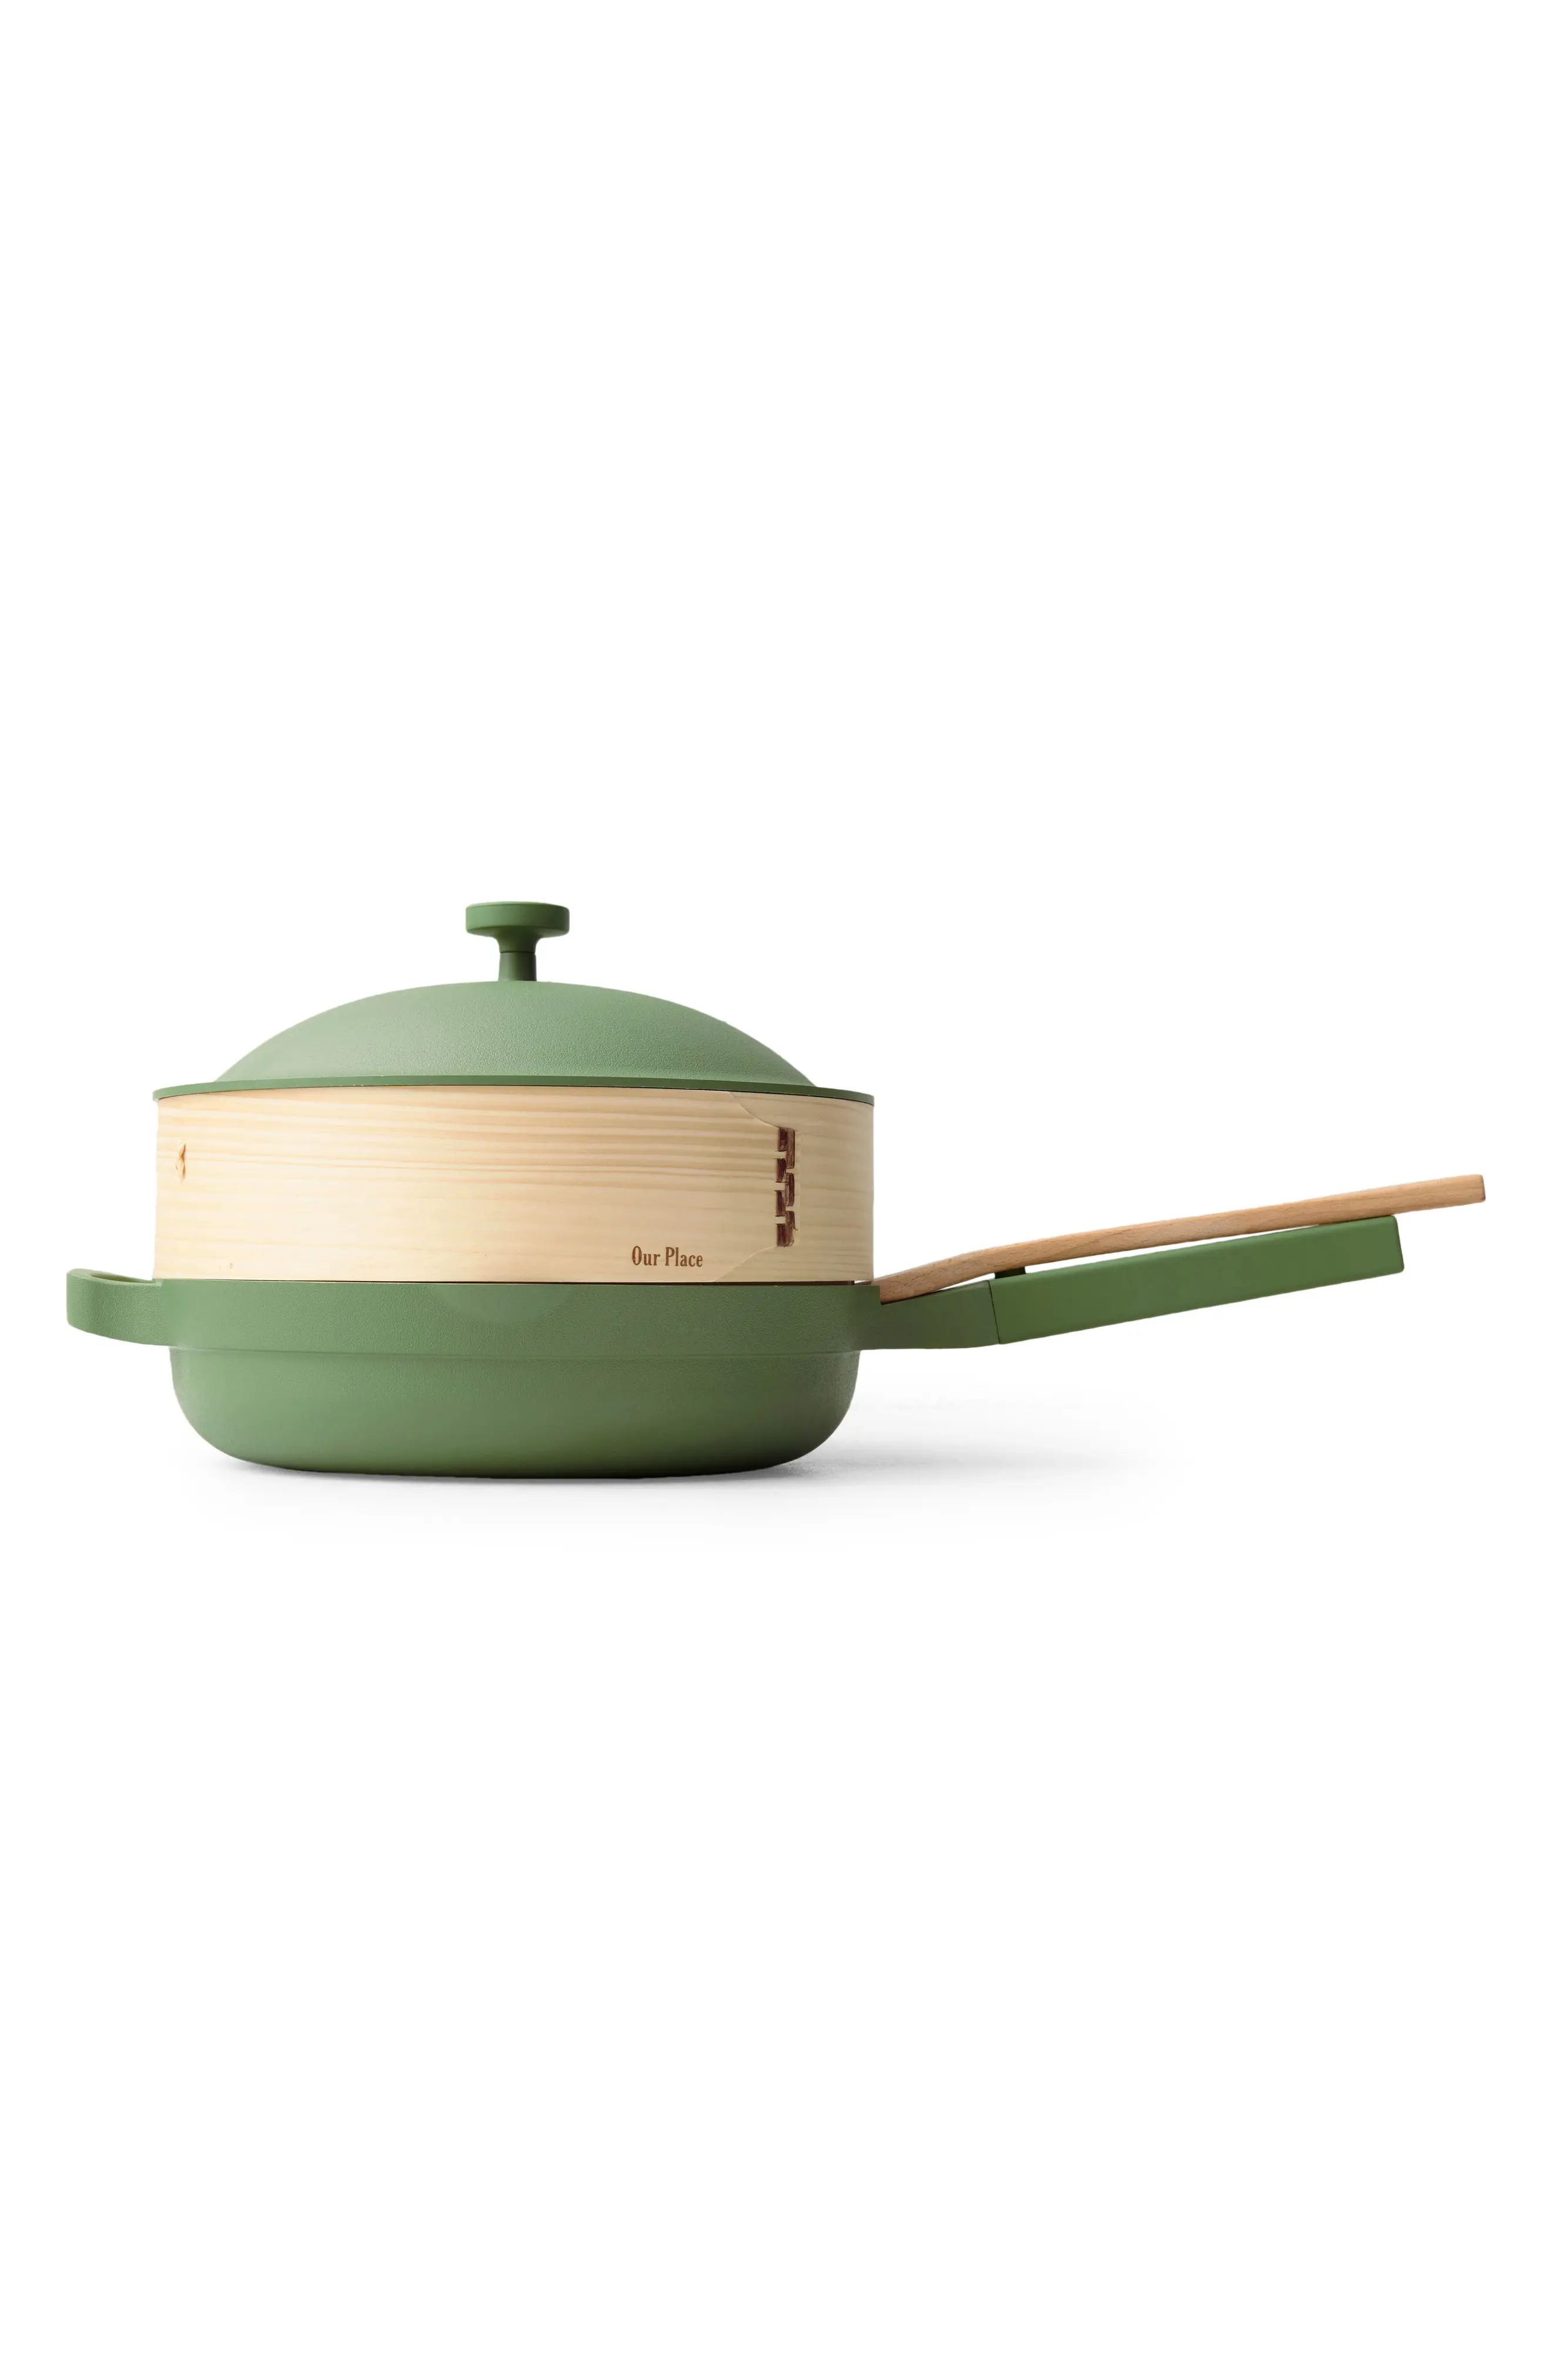 Our Place Always Pan with Spruce Steamer Set in Sage at Nordstrom | Nordstrom